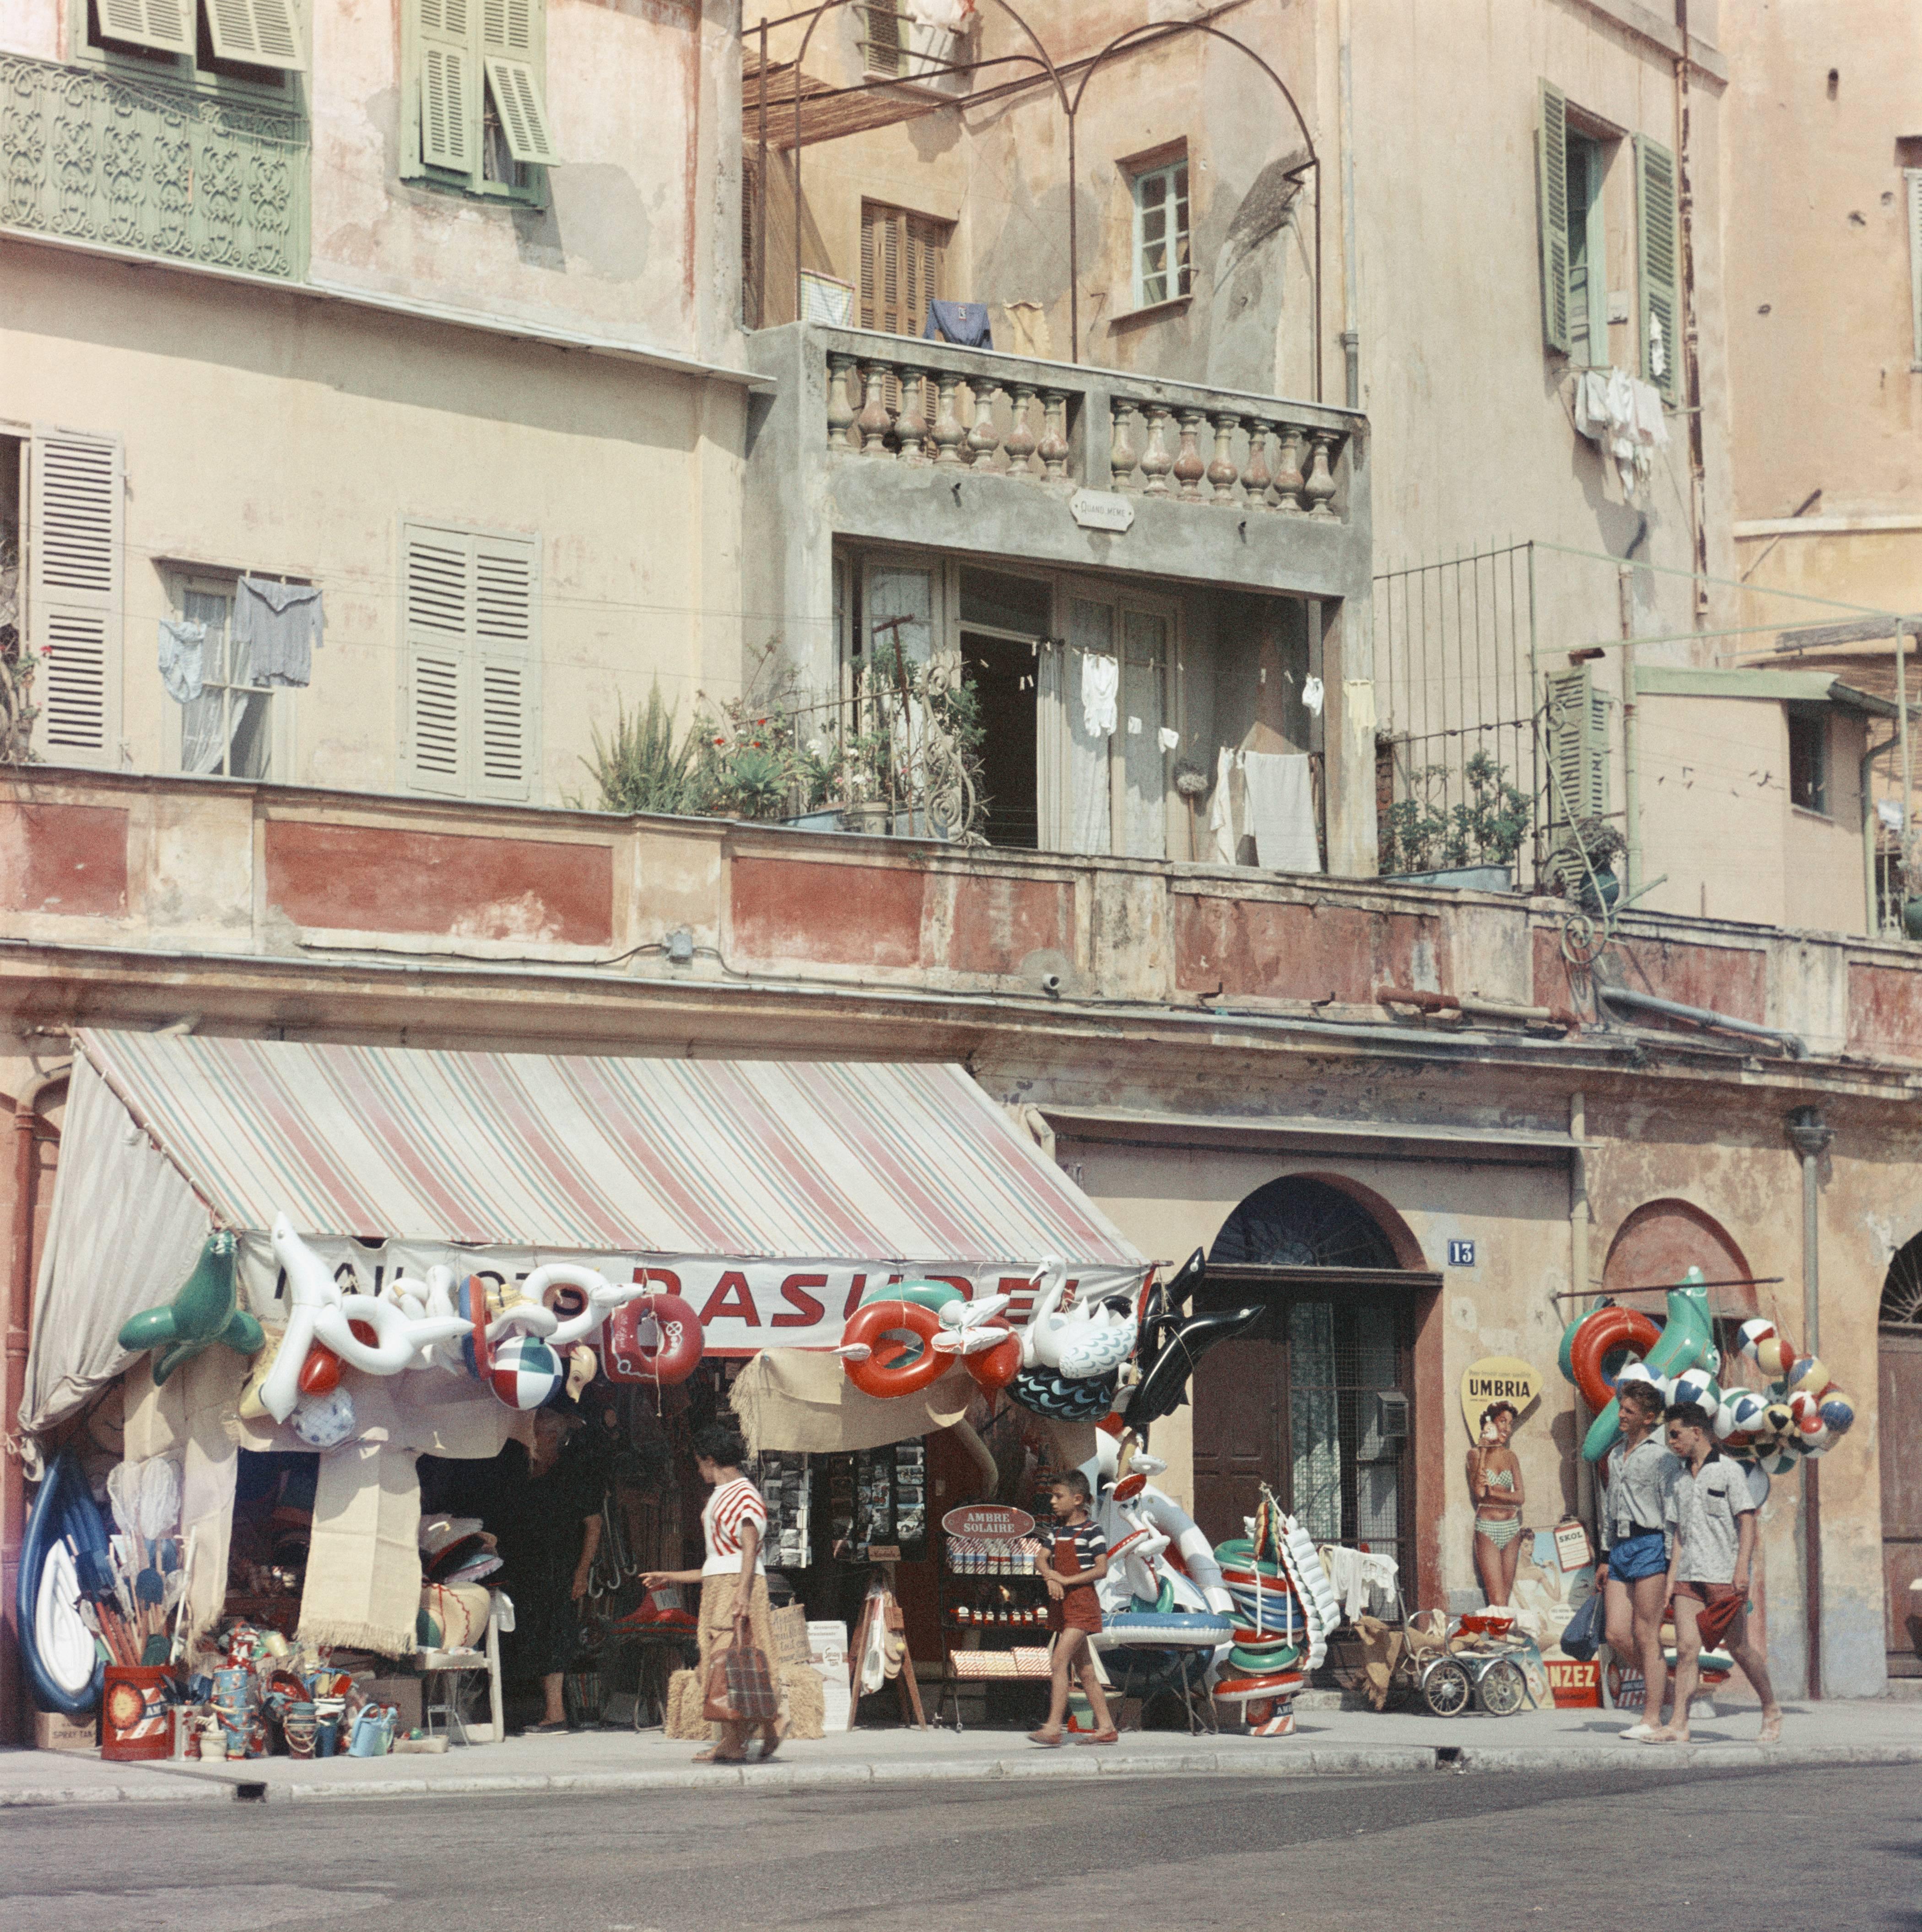 A shop selling beach paraphernalia in Menton, in southeastern France, 1957. (Photo by Slim Aarons/Getty Images)

C-type print from the original transparency held at the Getty Images Archive, London.  Numbered and stamped by The Slim Aarons Estate. 